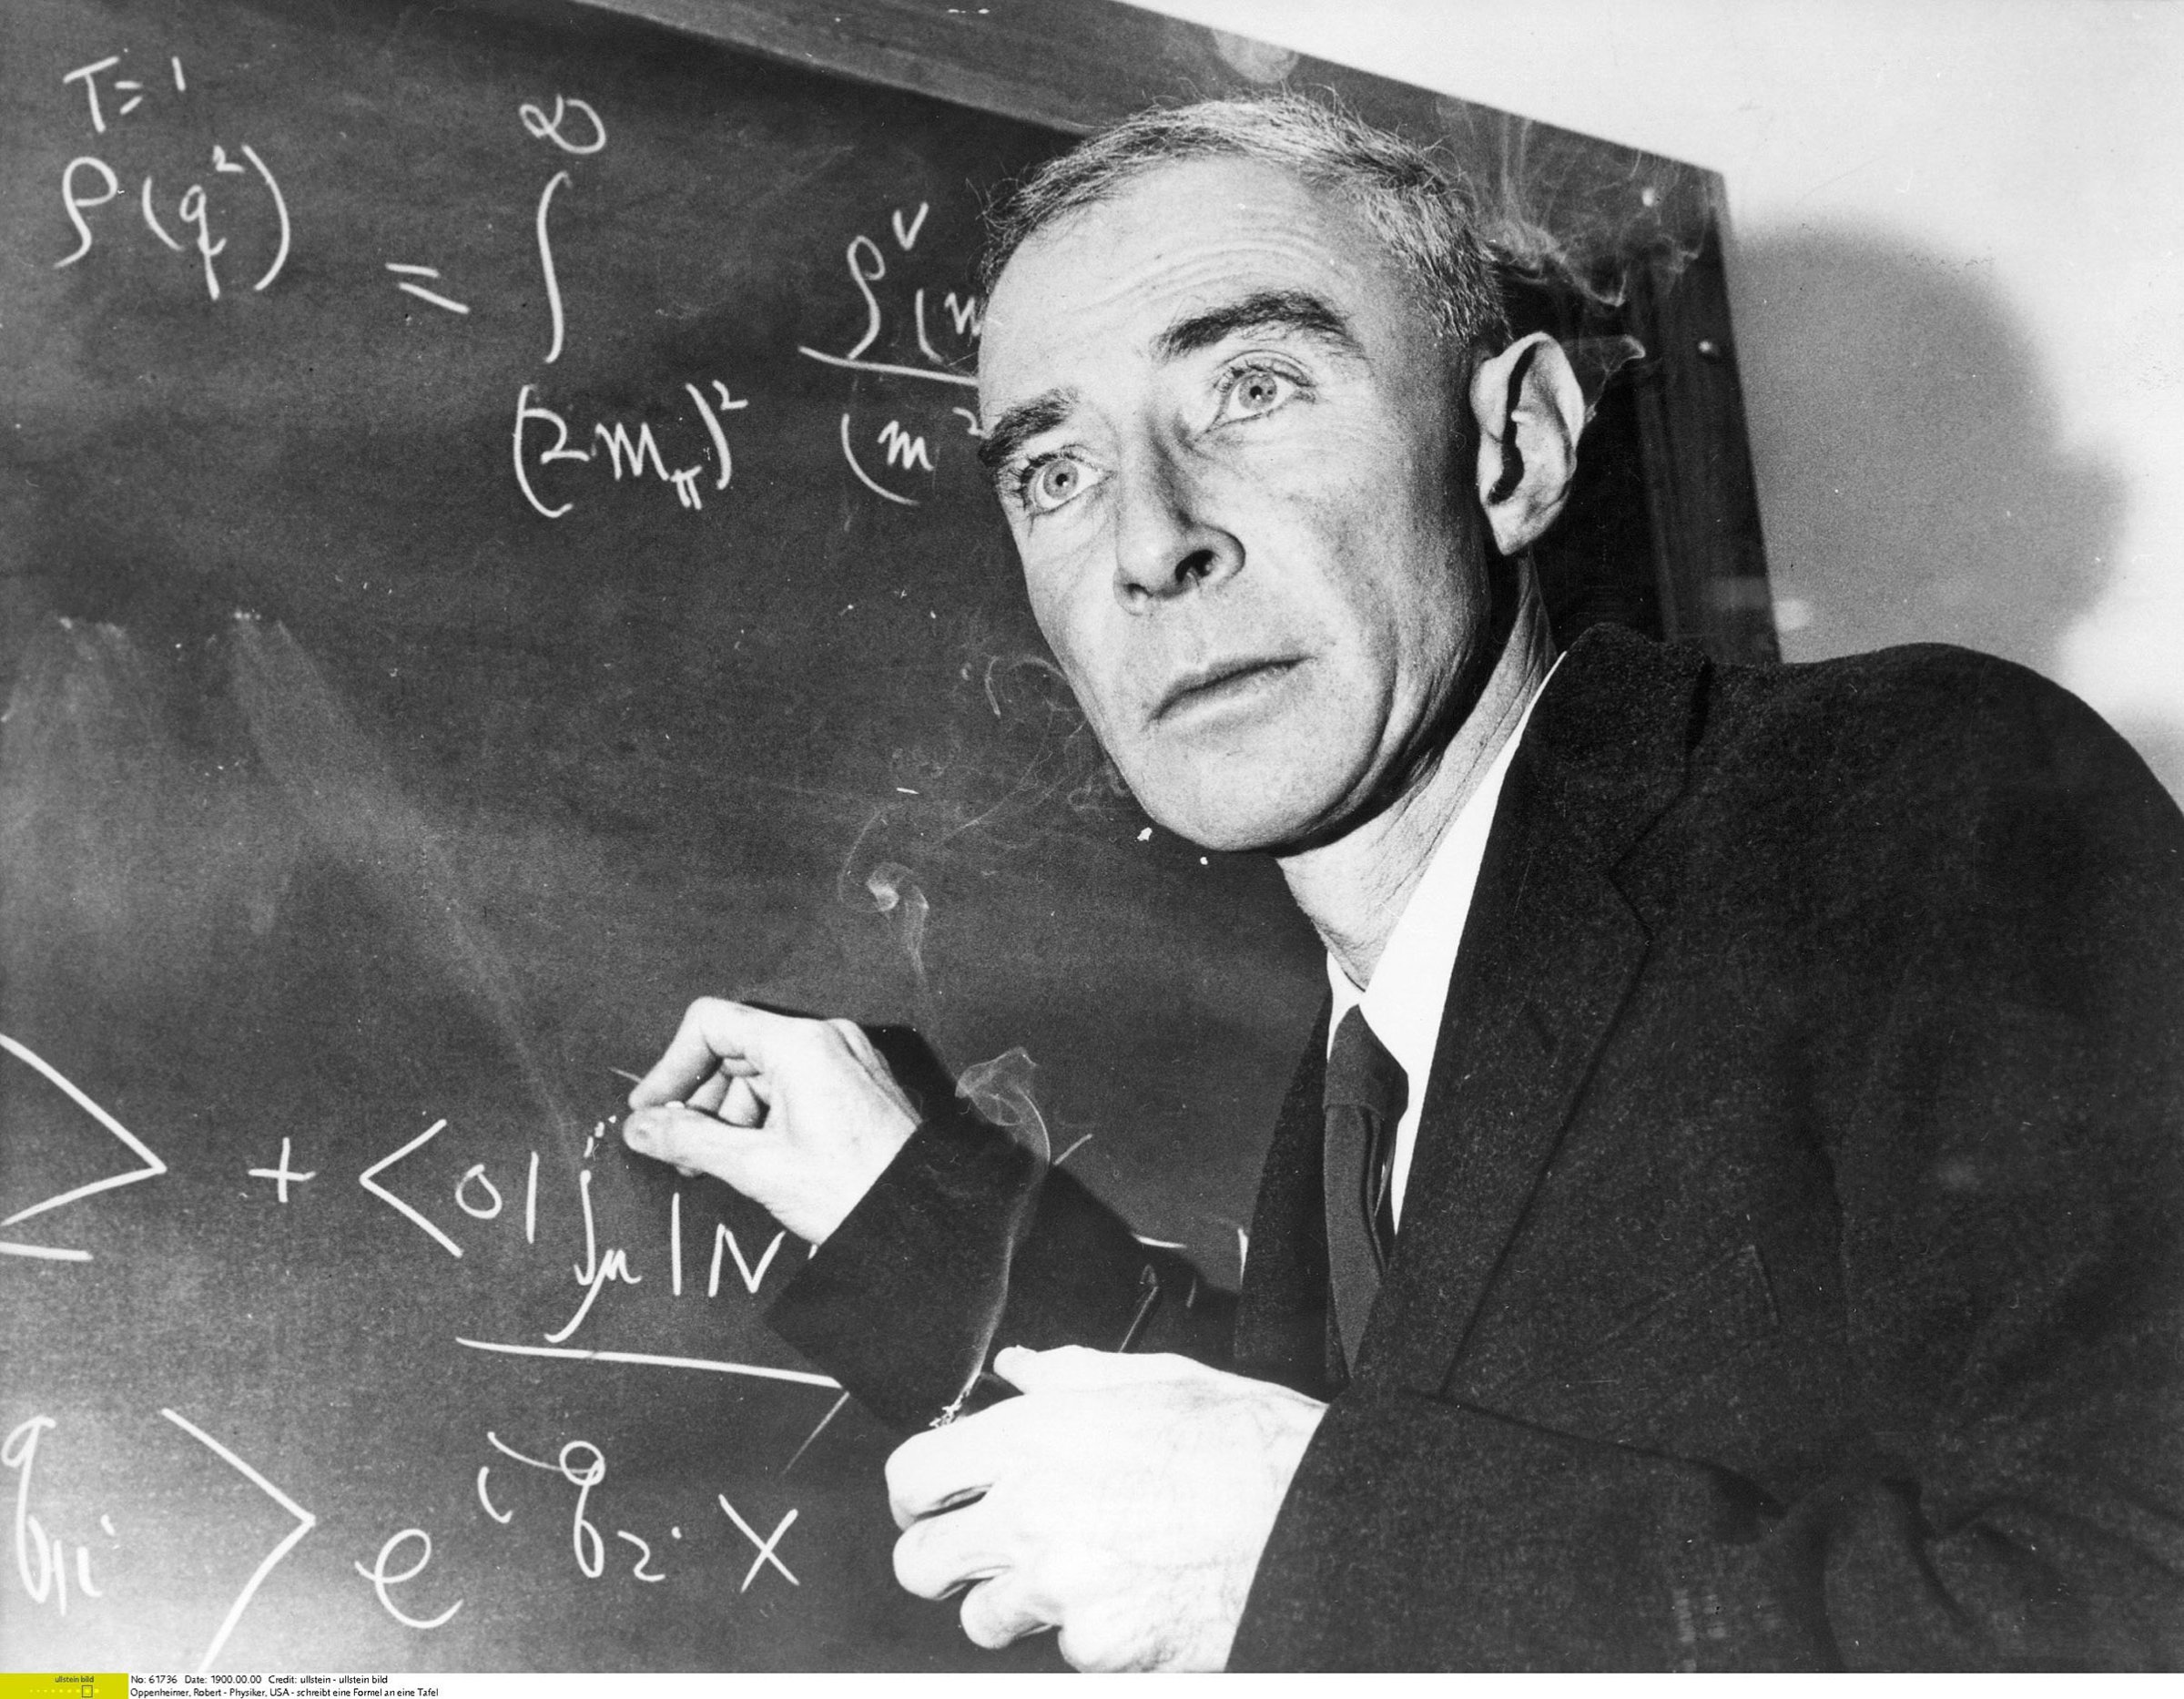 Oppenheimer never reconciled his political views with the future his work created